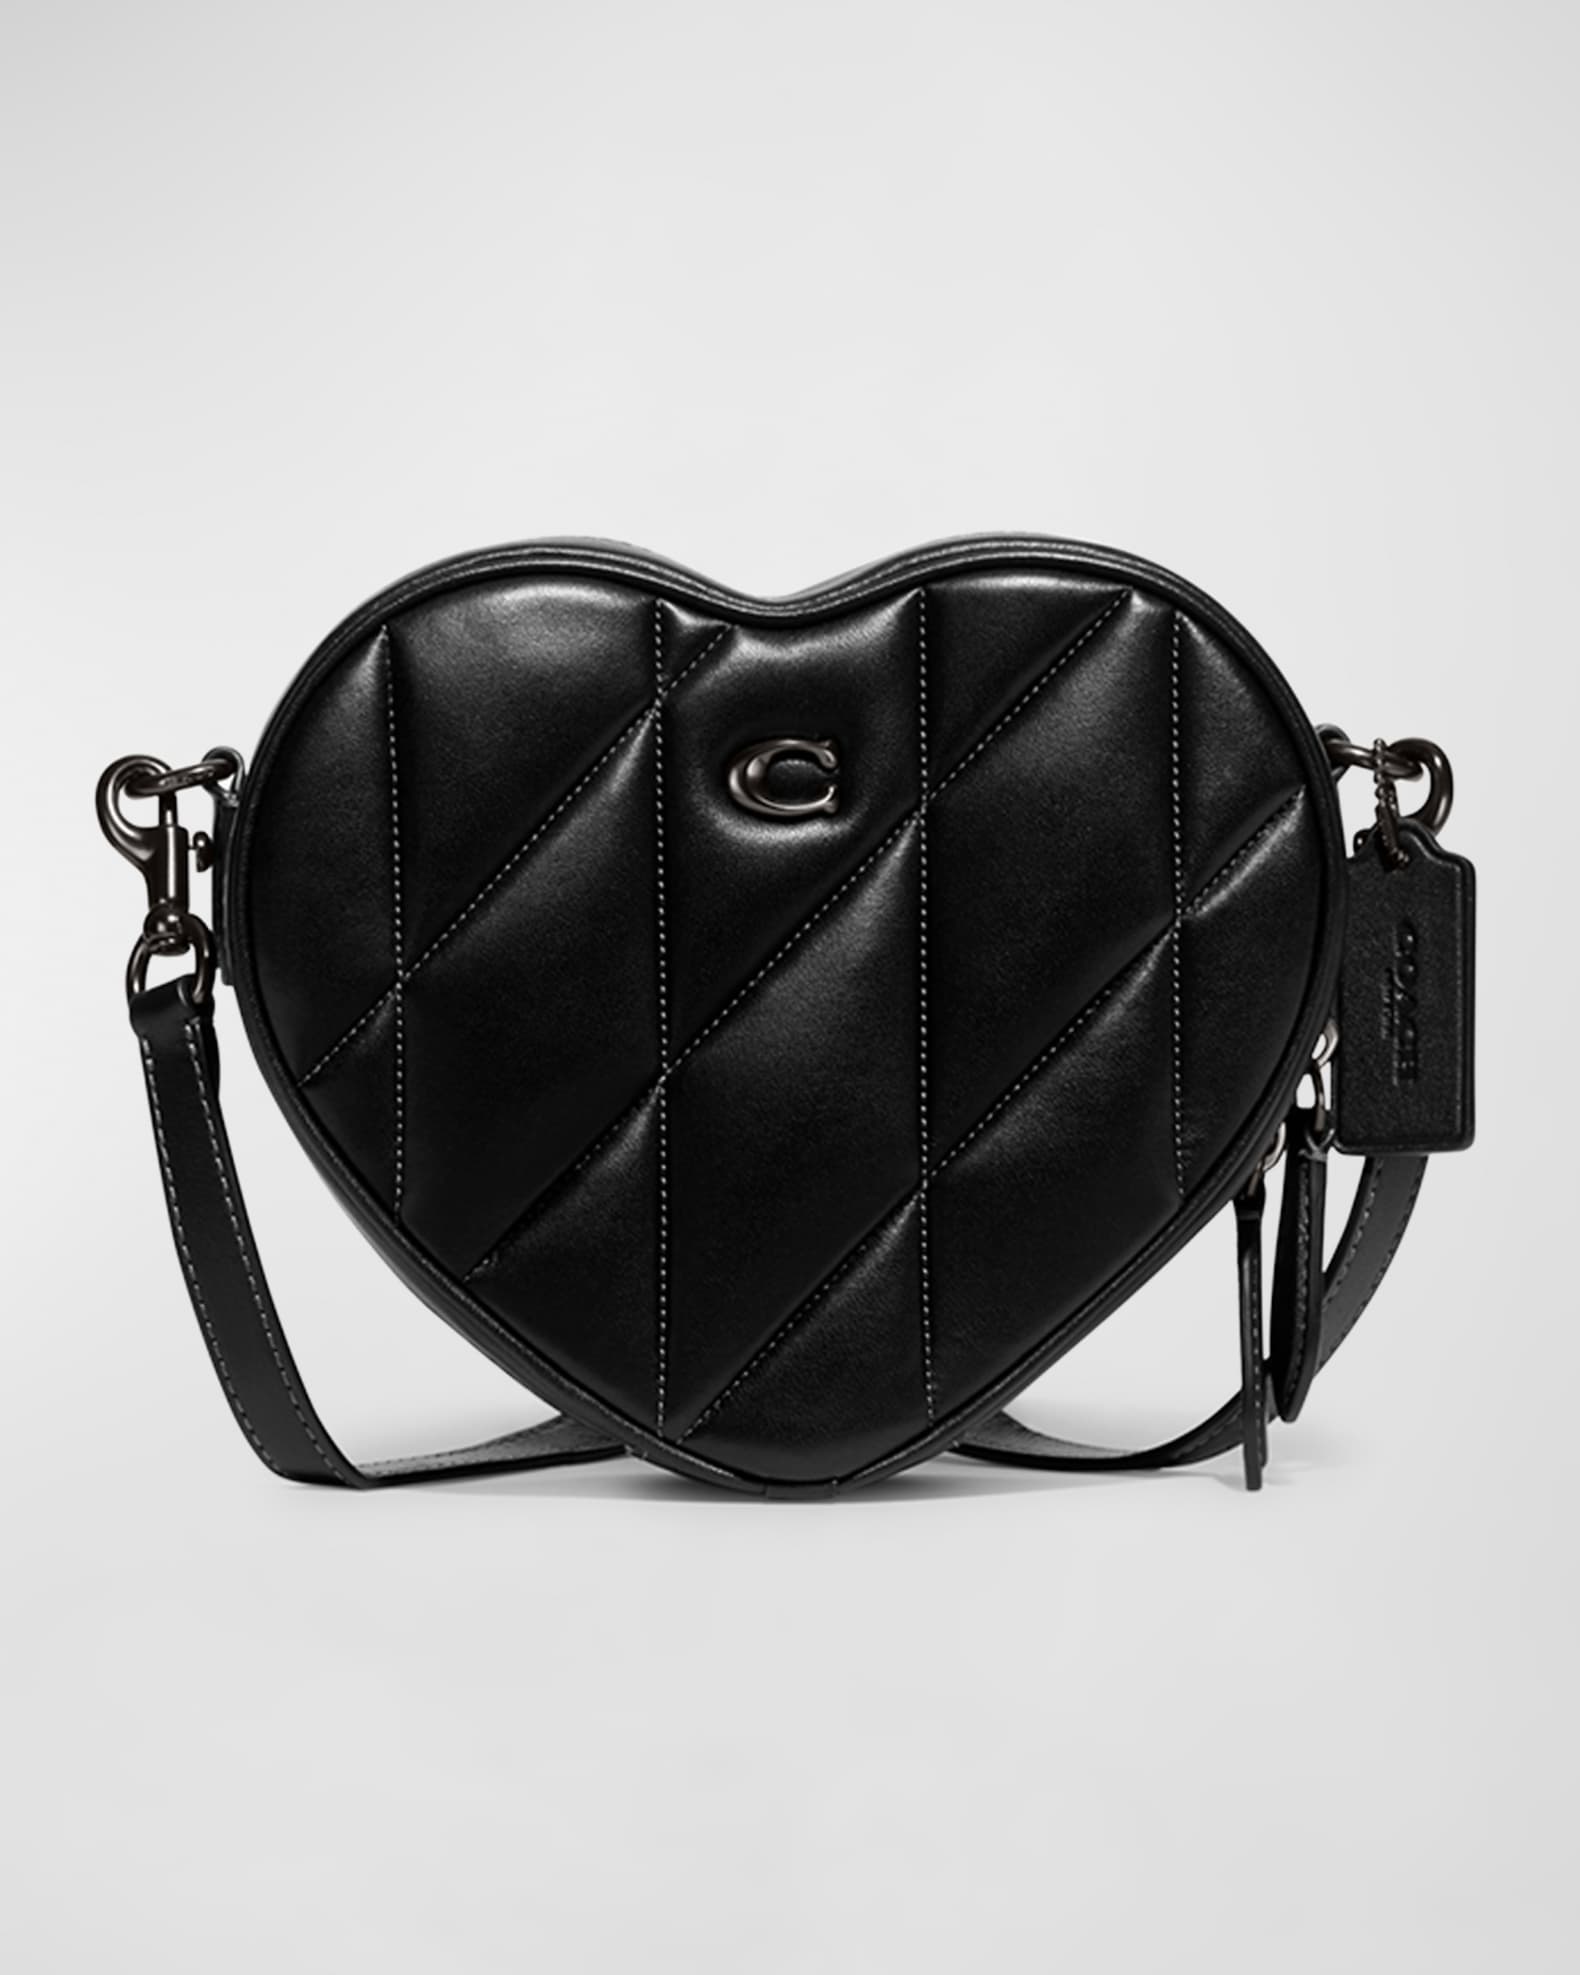 Luxury bag - Alice Chloé mini bag in black leather and python.